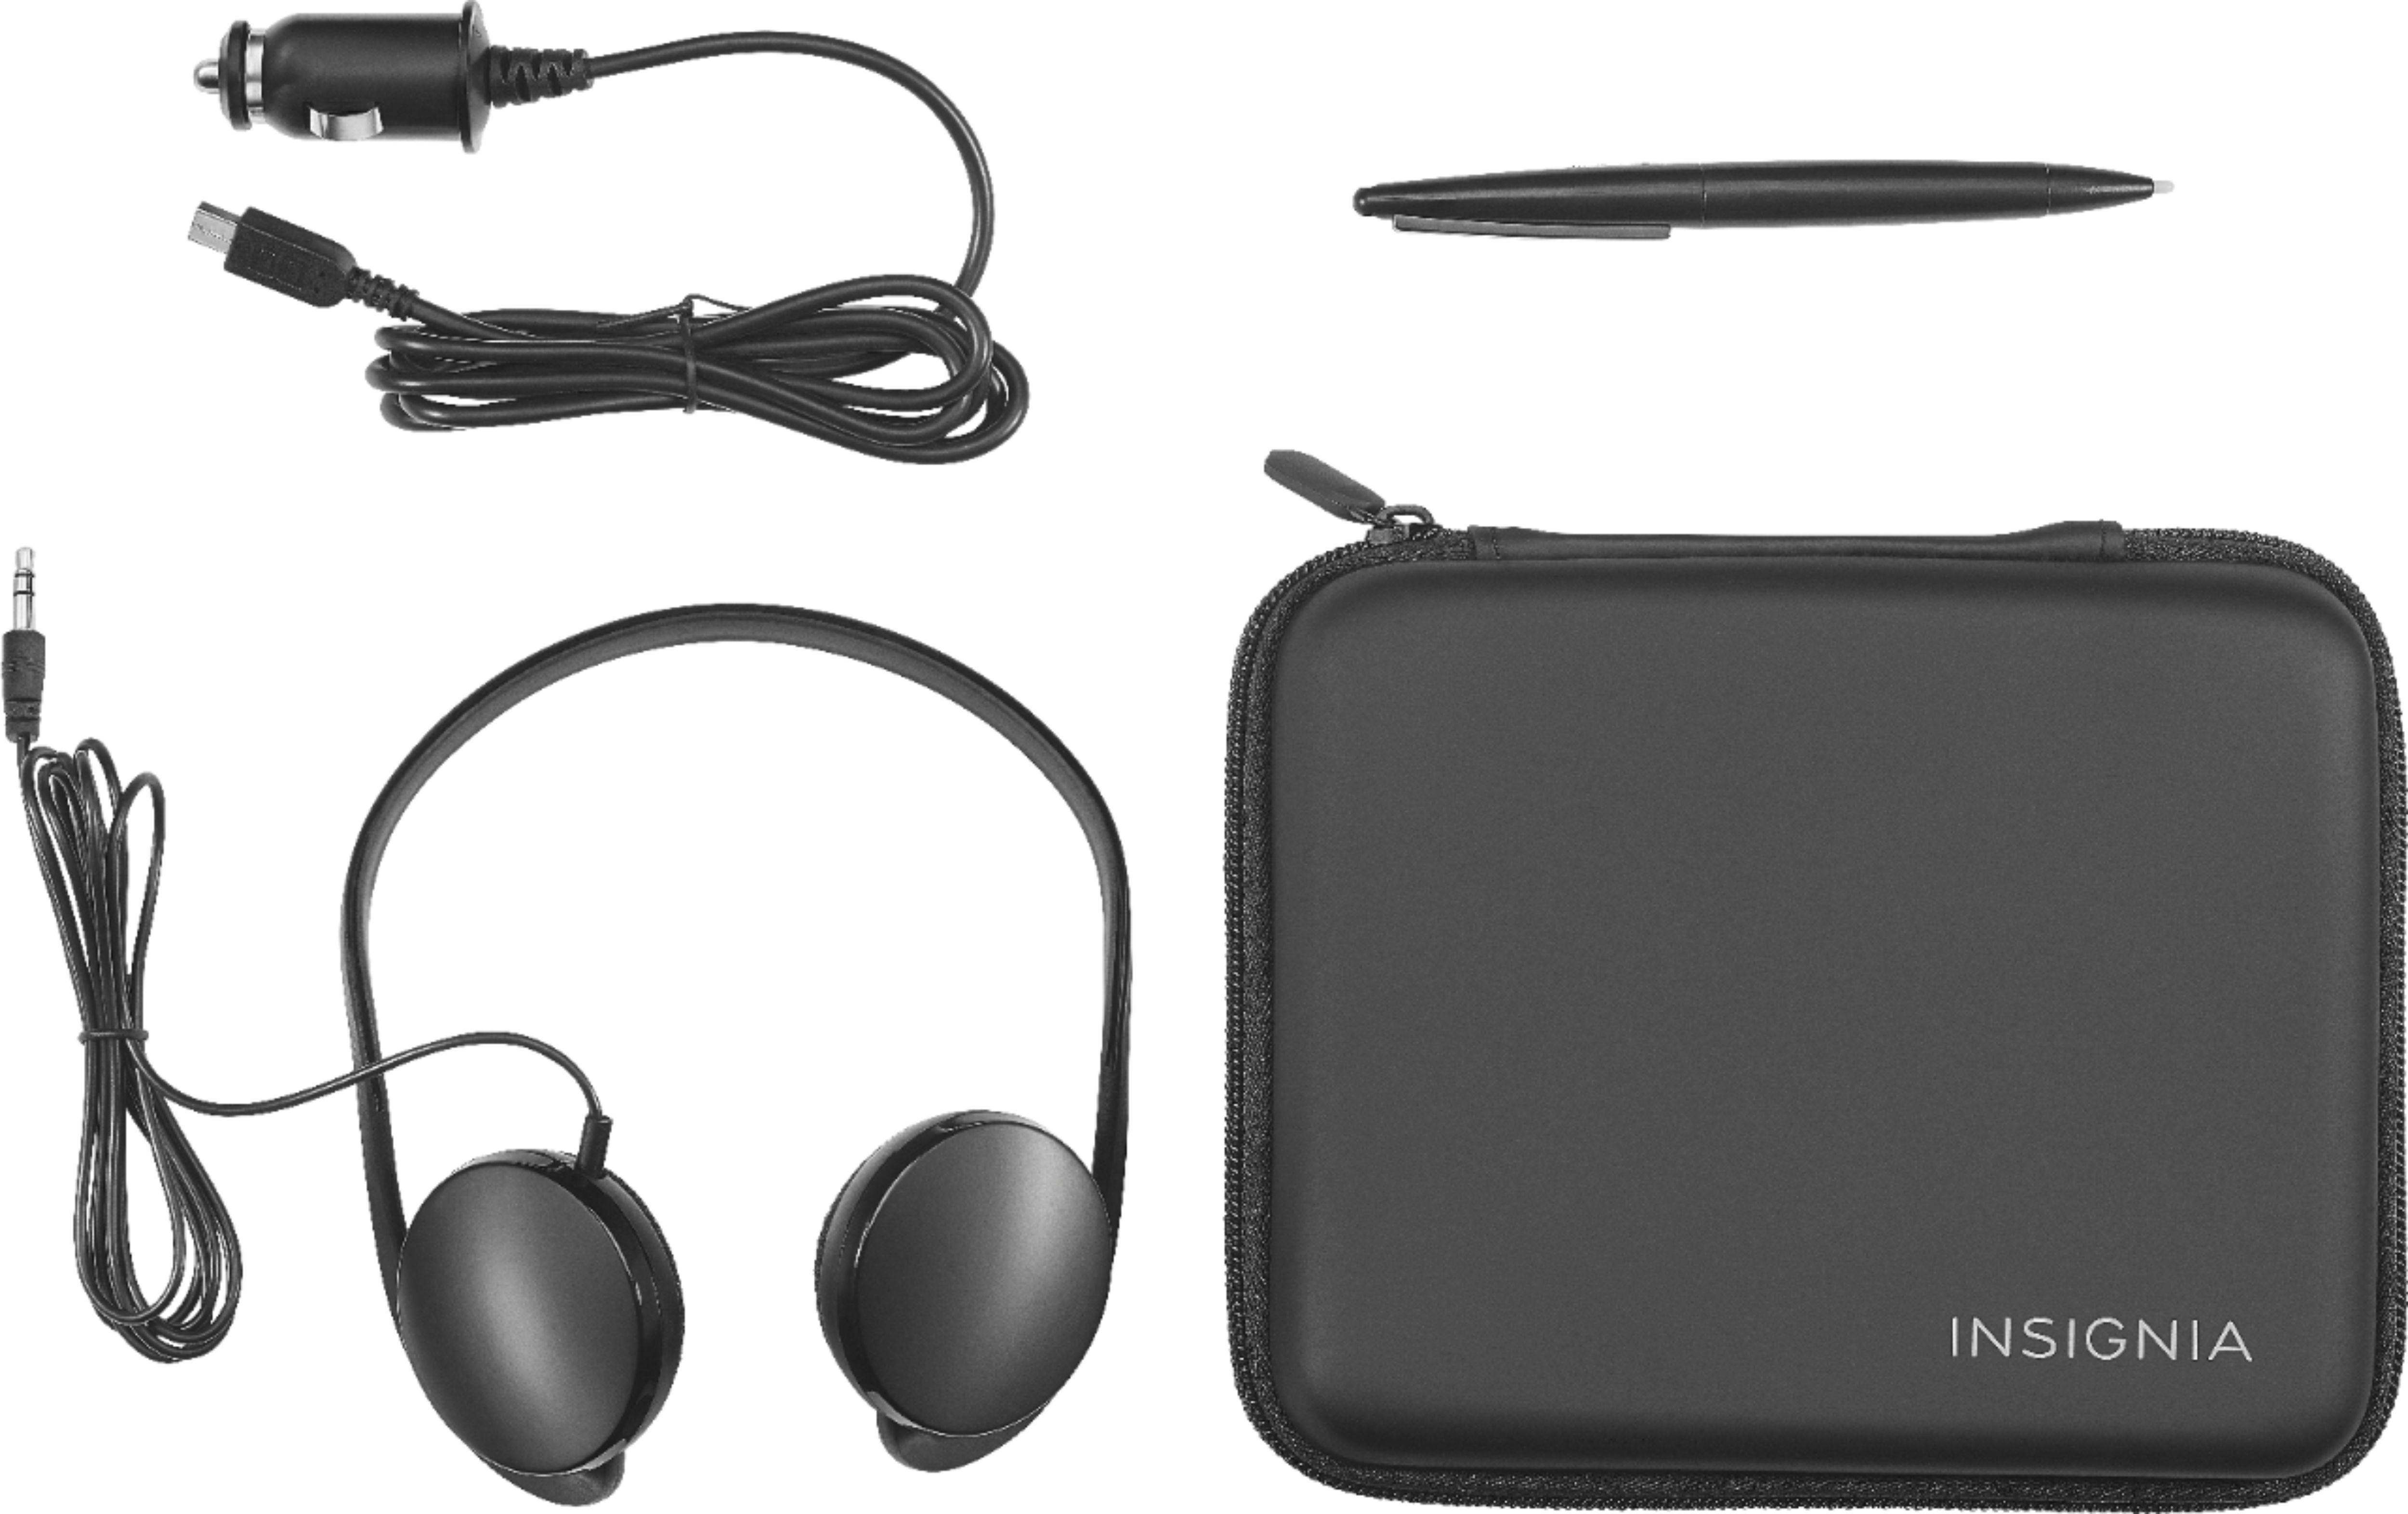 3ds xl accessories must have